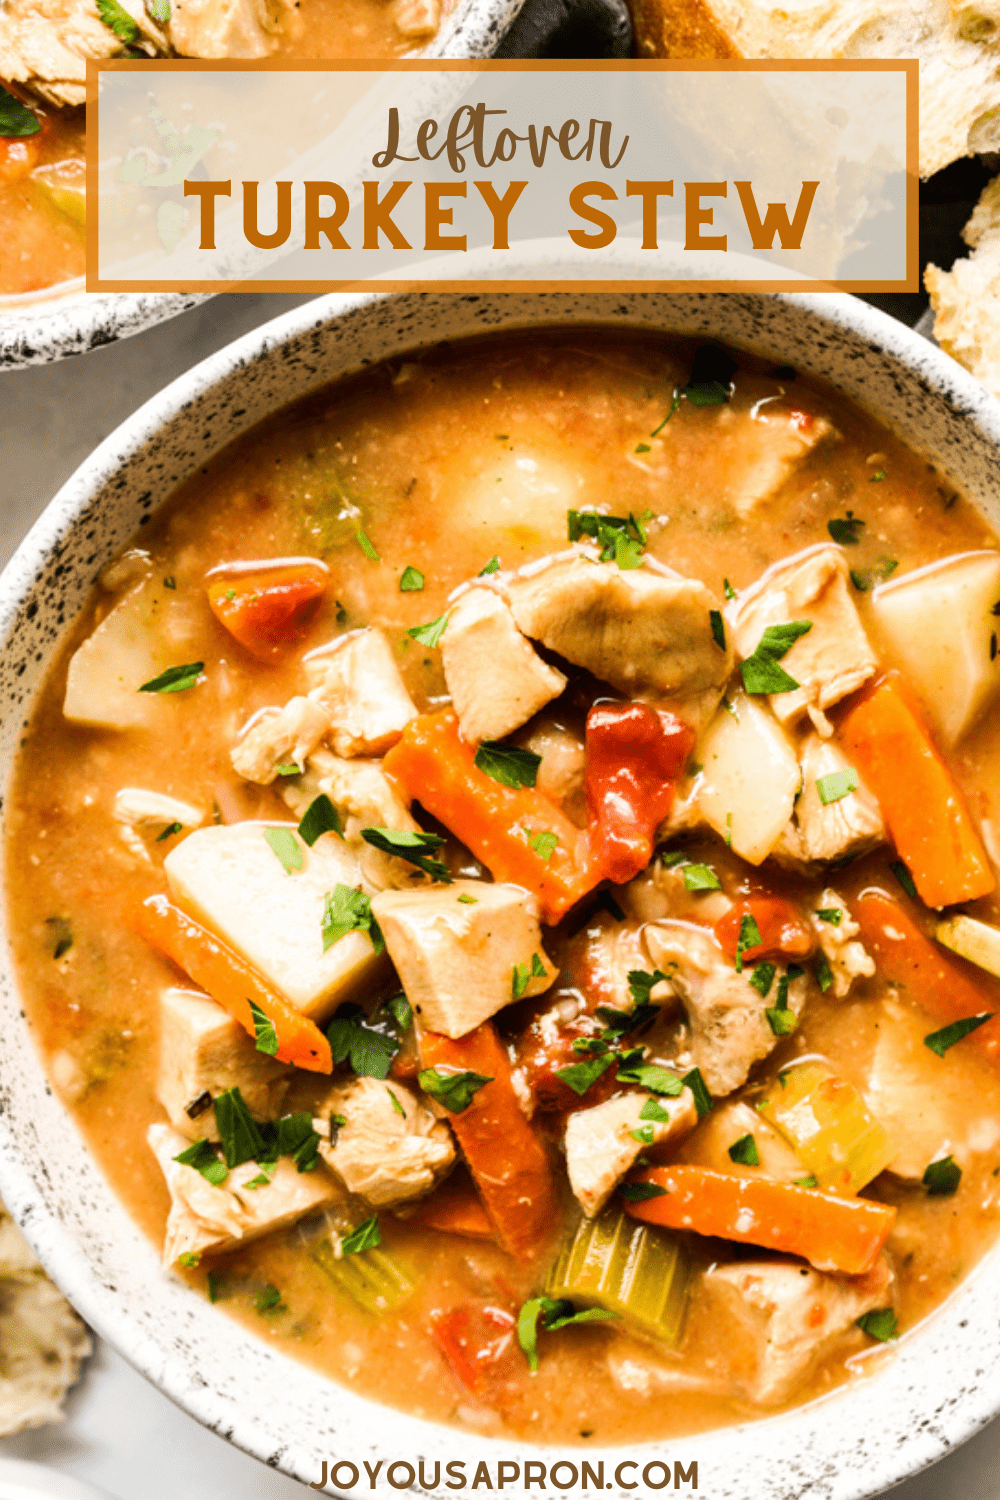 Turkey Stew - leftover turkey soup recipe! Combined with carrots, celery, tomatoes and potatoes for a healthy, warm and hearty meal. Comfort food for the body and soul! via @joyousapron